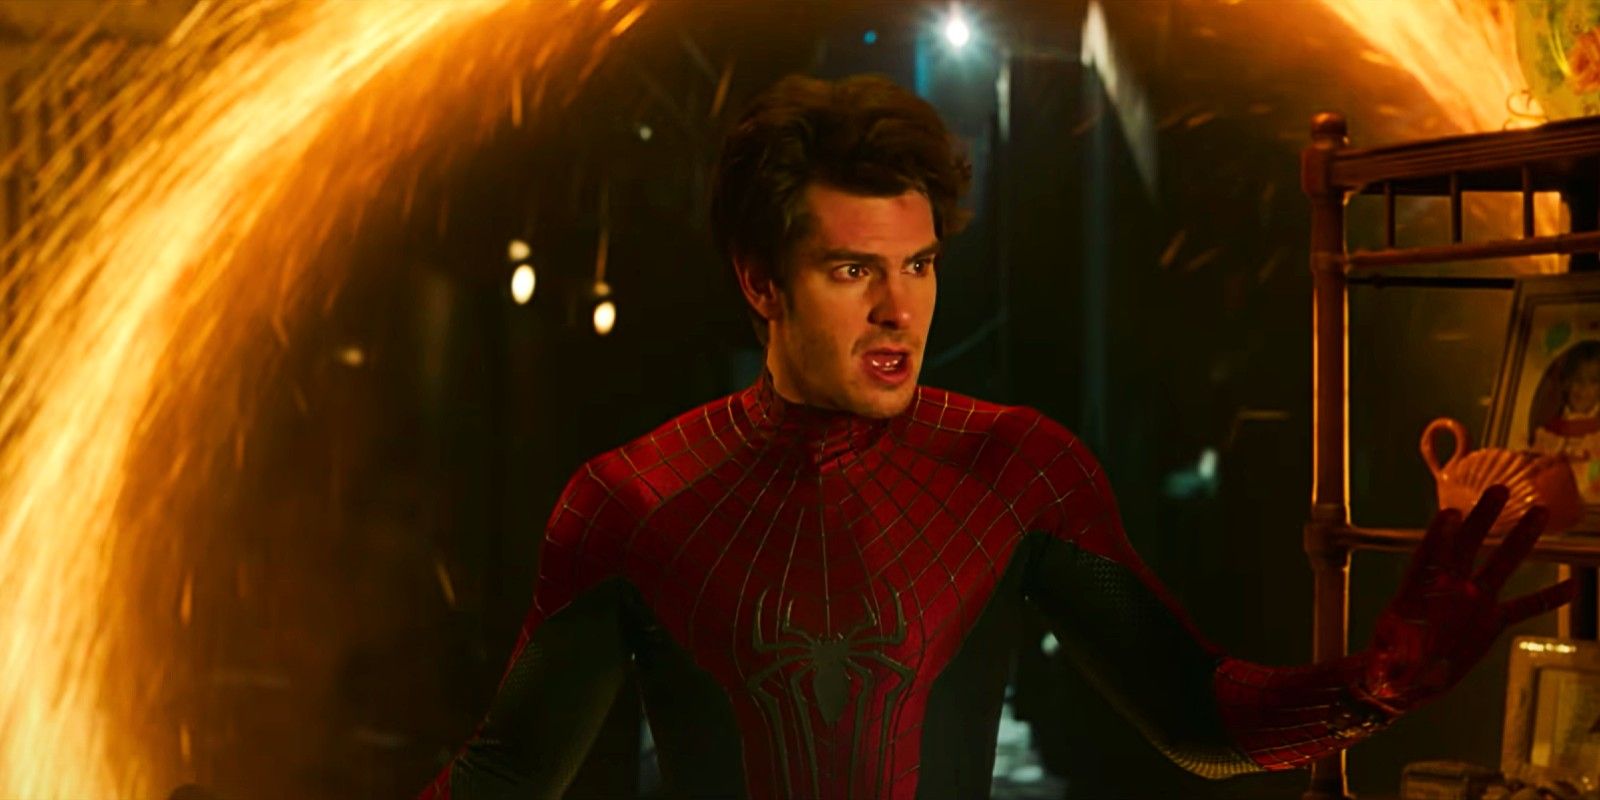 Andrew Garfield as Peter 3 in Spider Man No Way Home